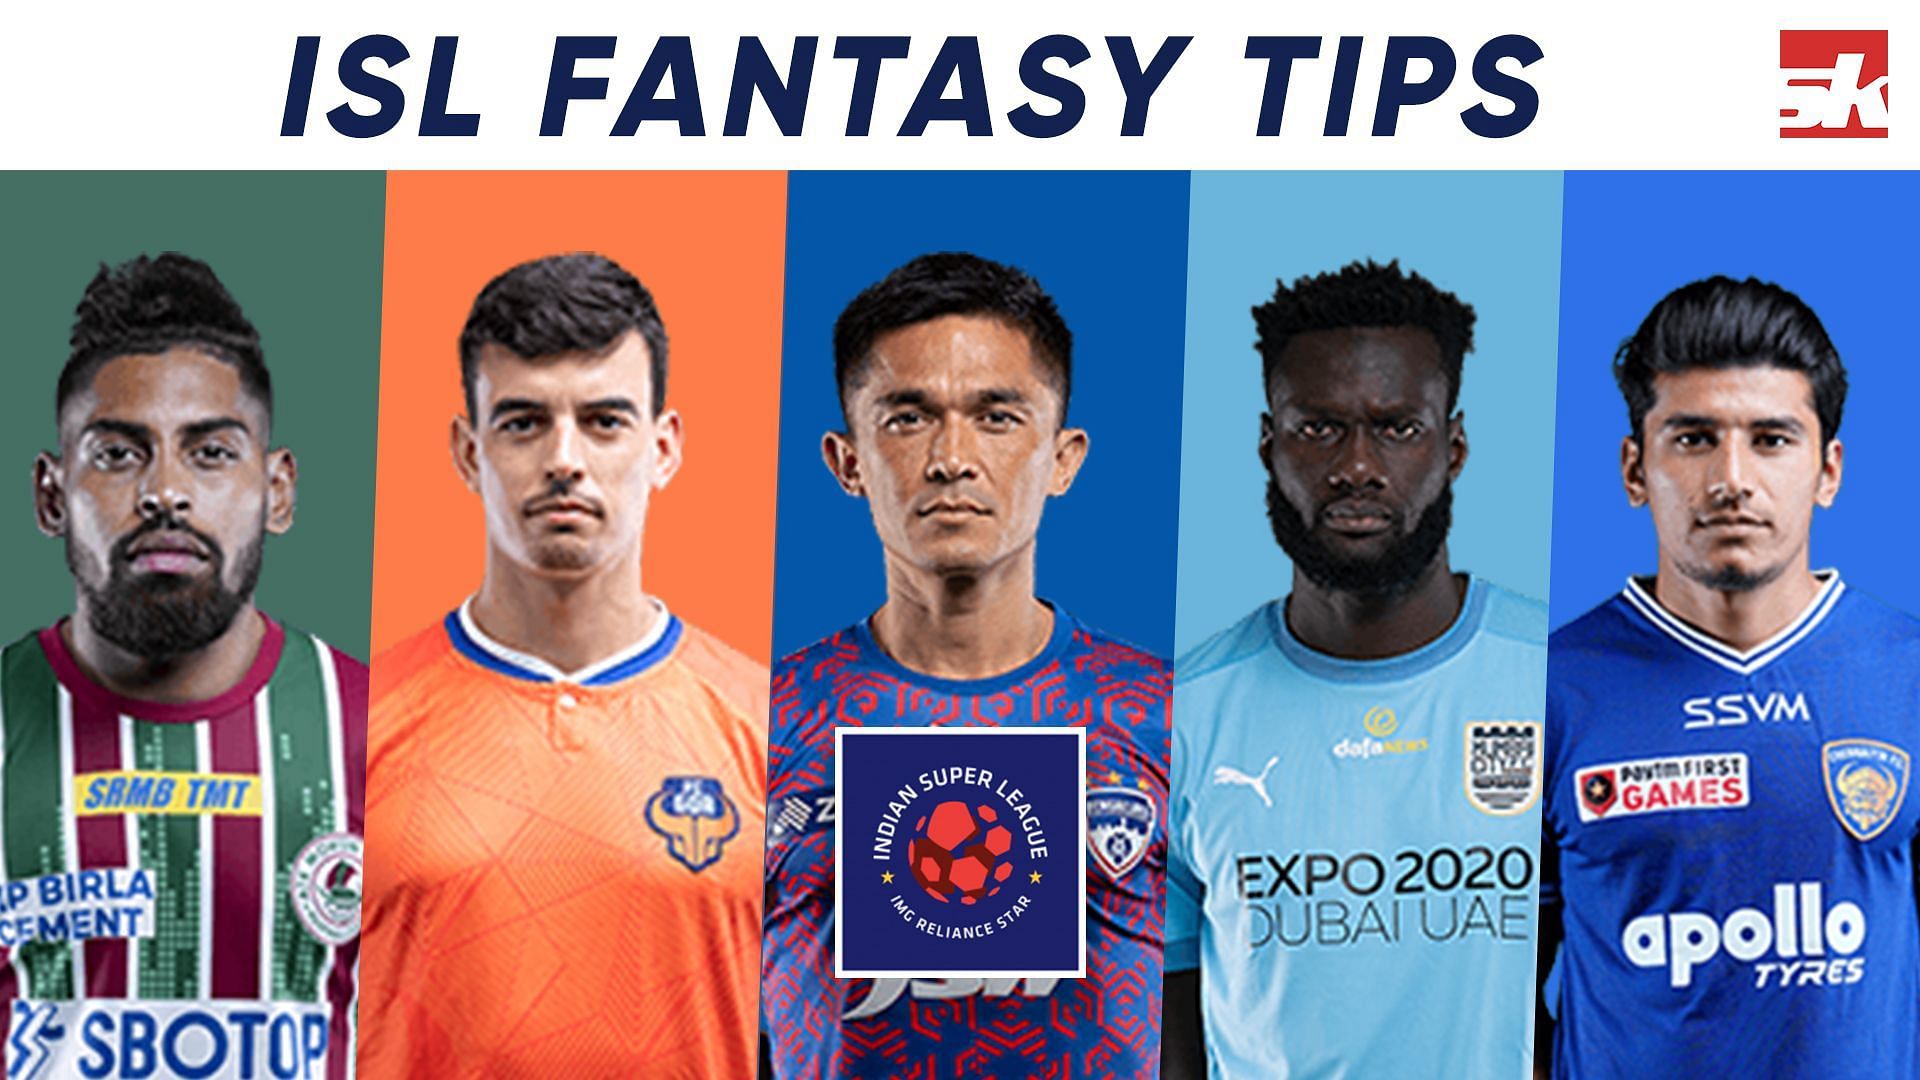 SC East Bengal vs NorthEast United Dream11 Prediction, Fantasy Football Tips &amp; Playing 11 Updates for Today&#039;s ISL match - February 28th, 2022